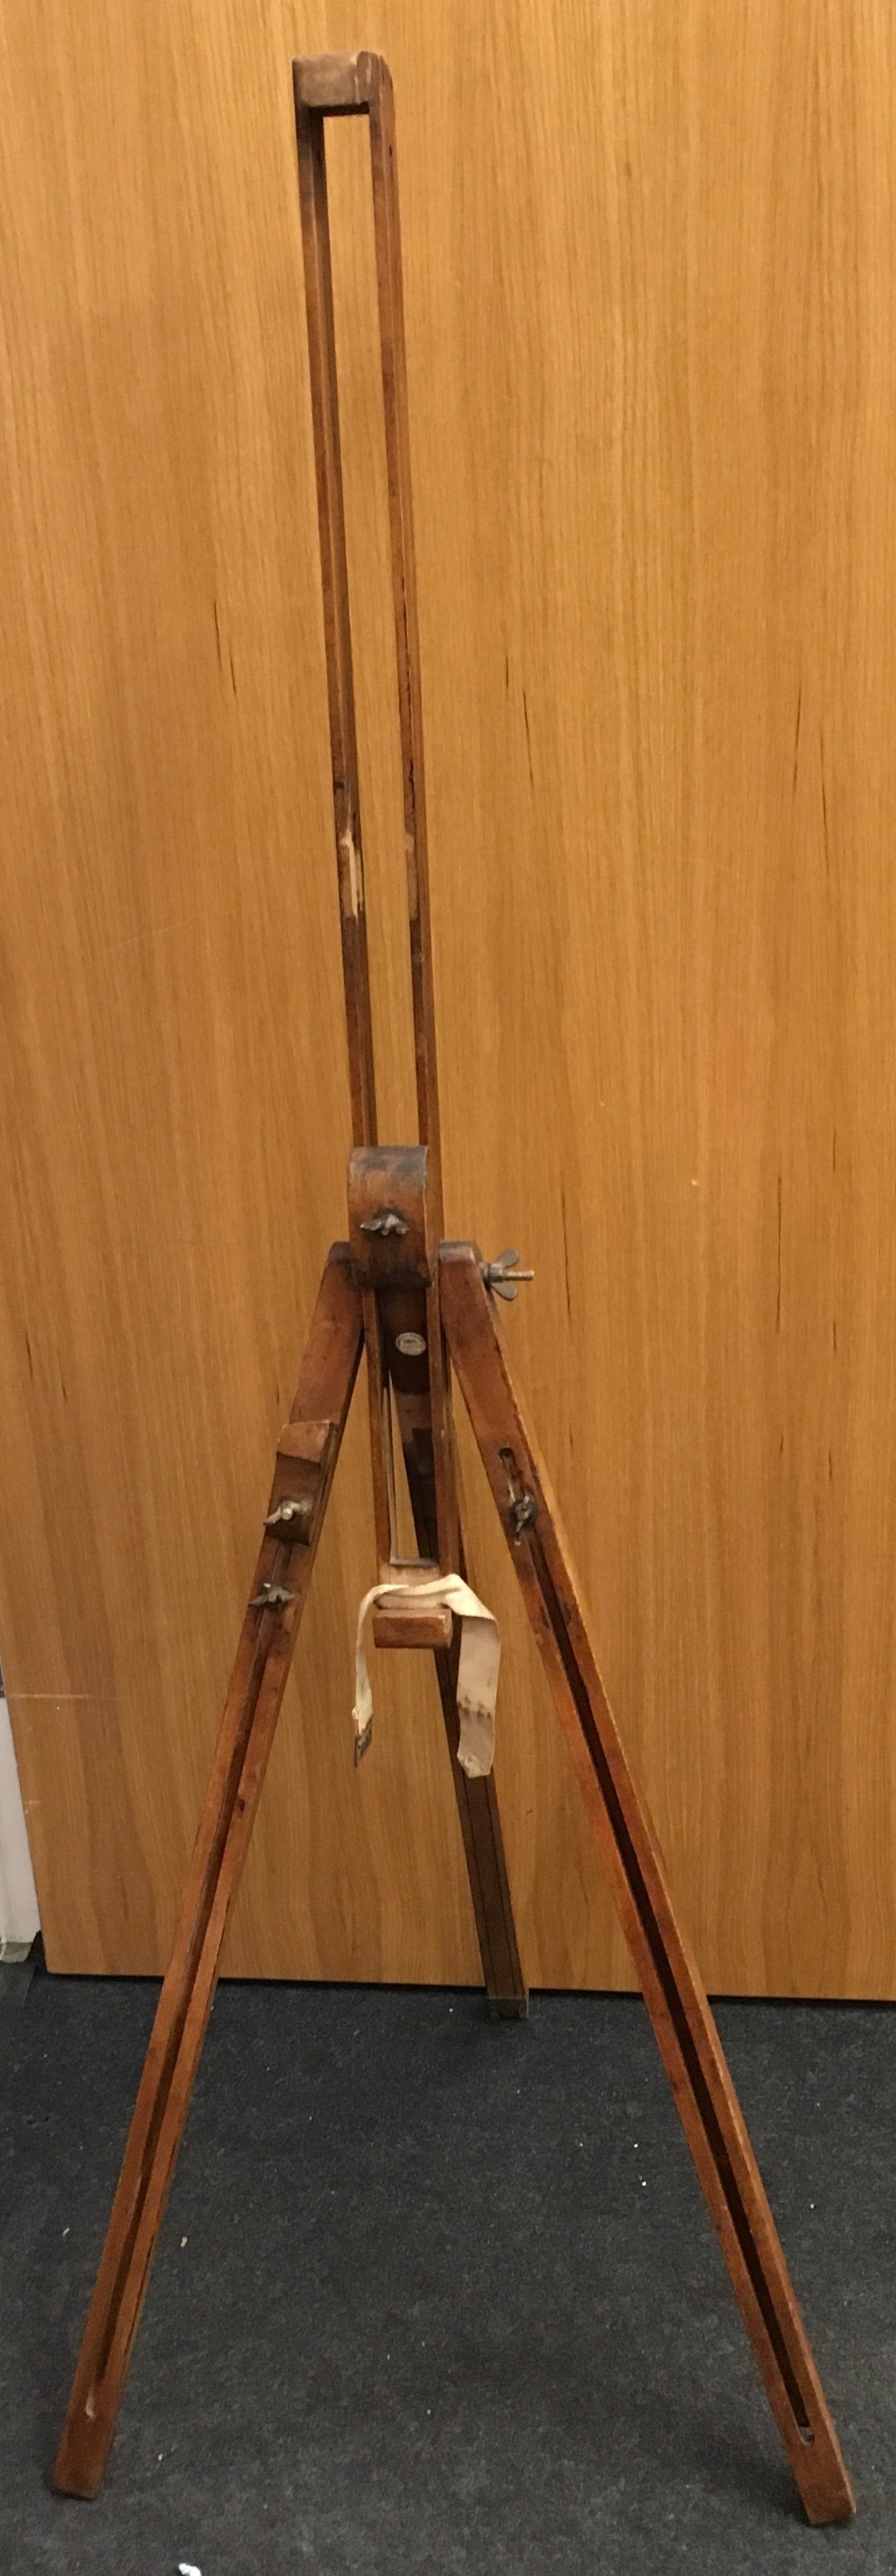 A vintage wooden easel 136cm tall.